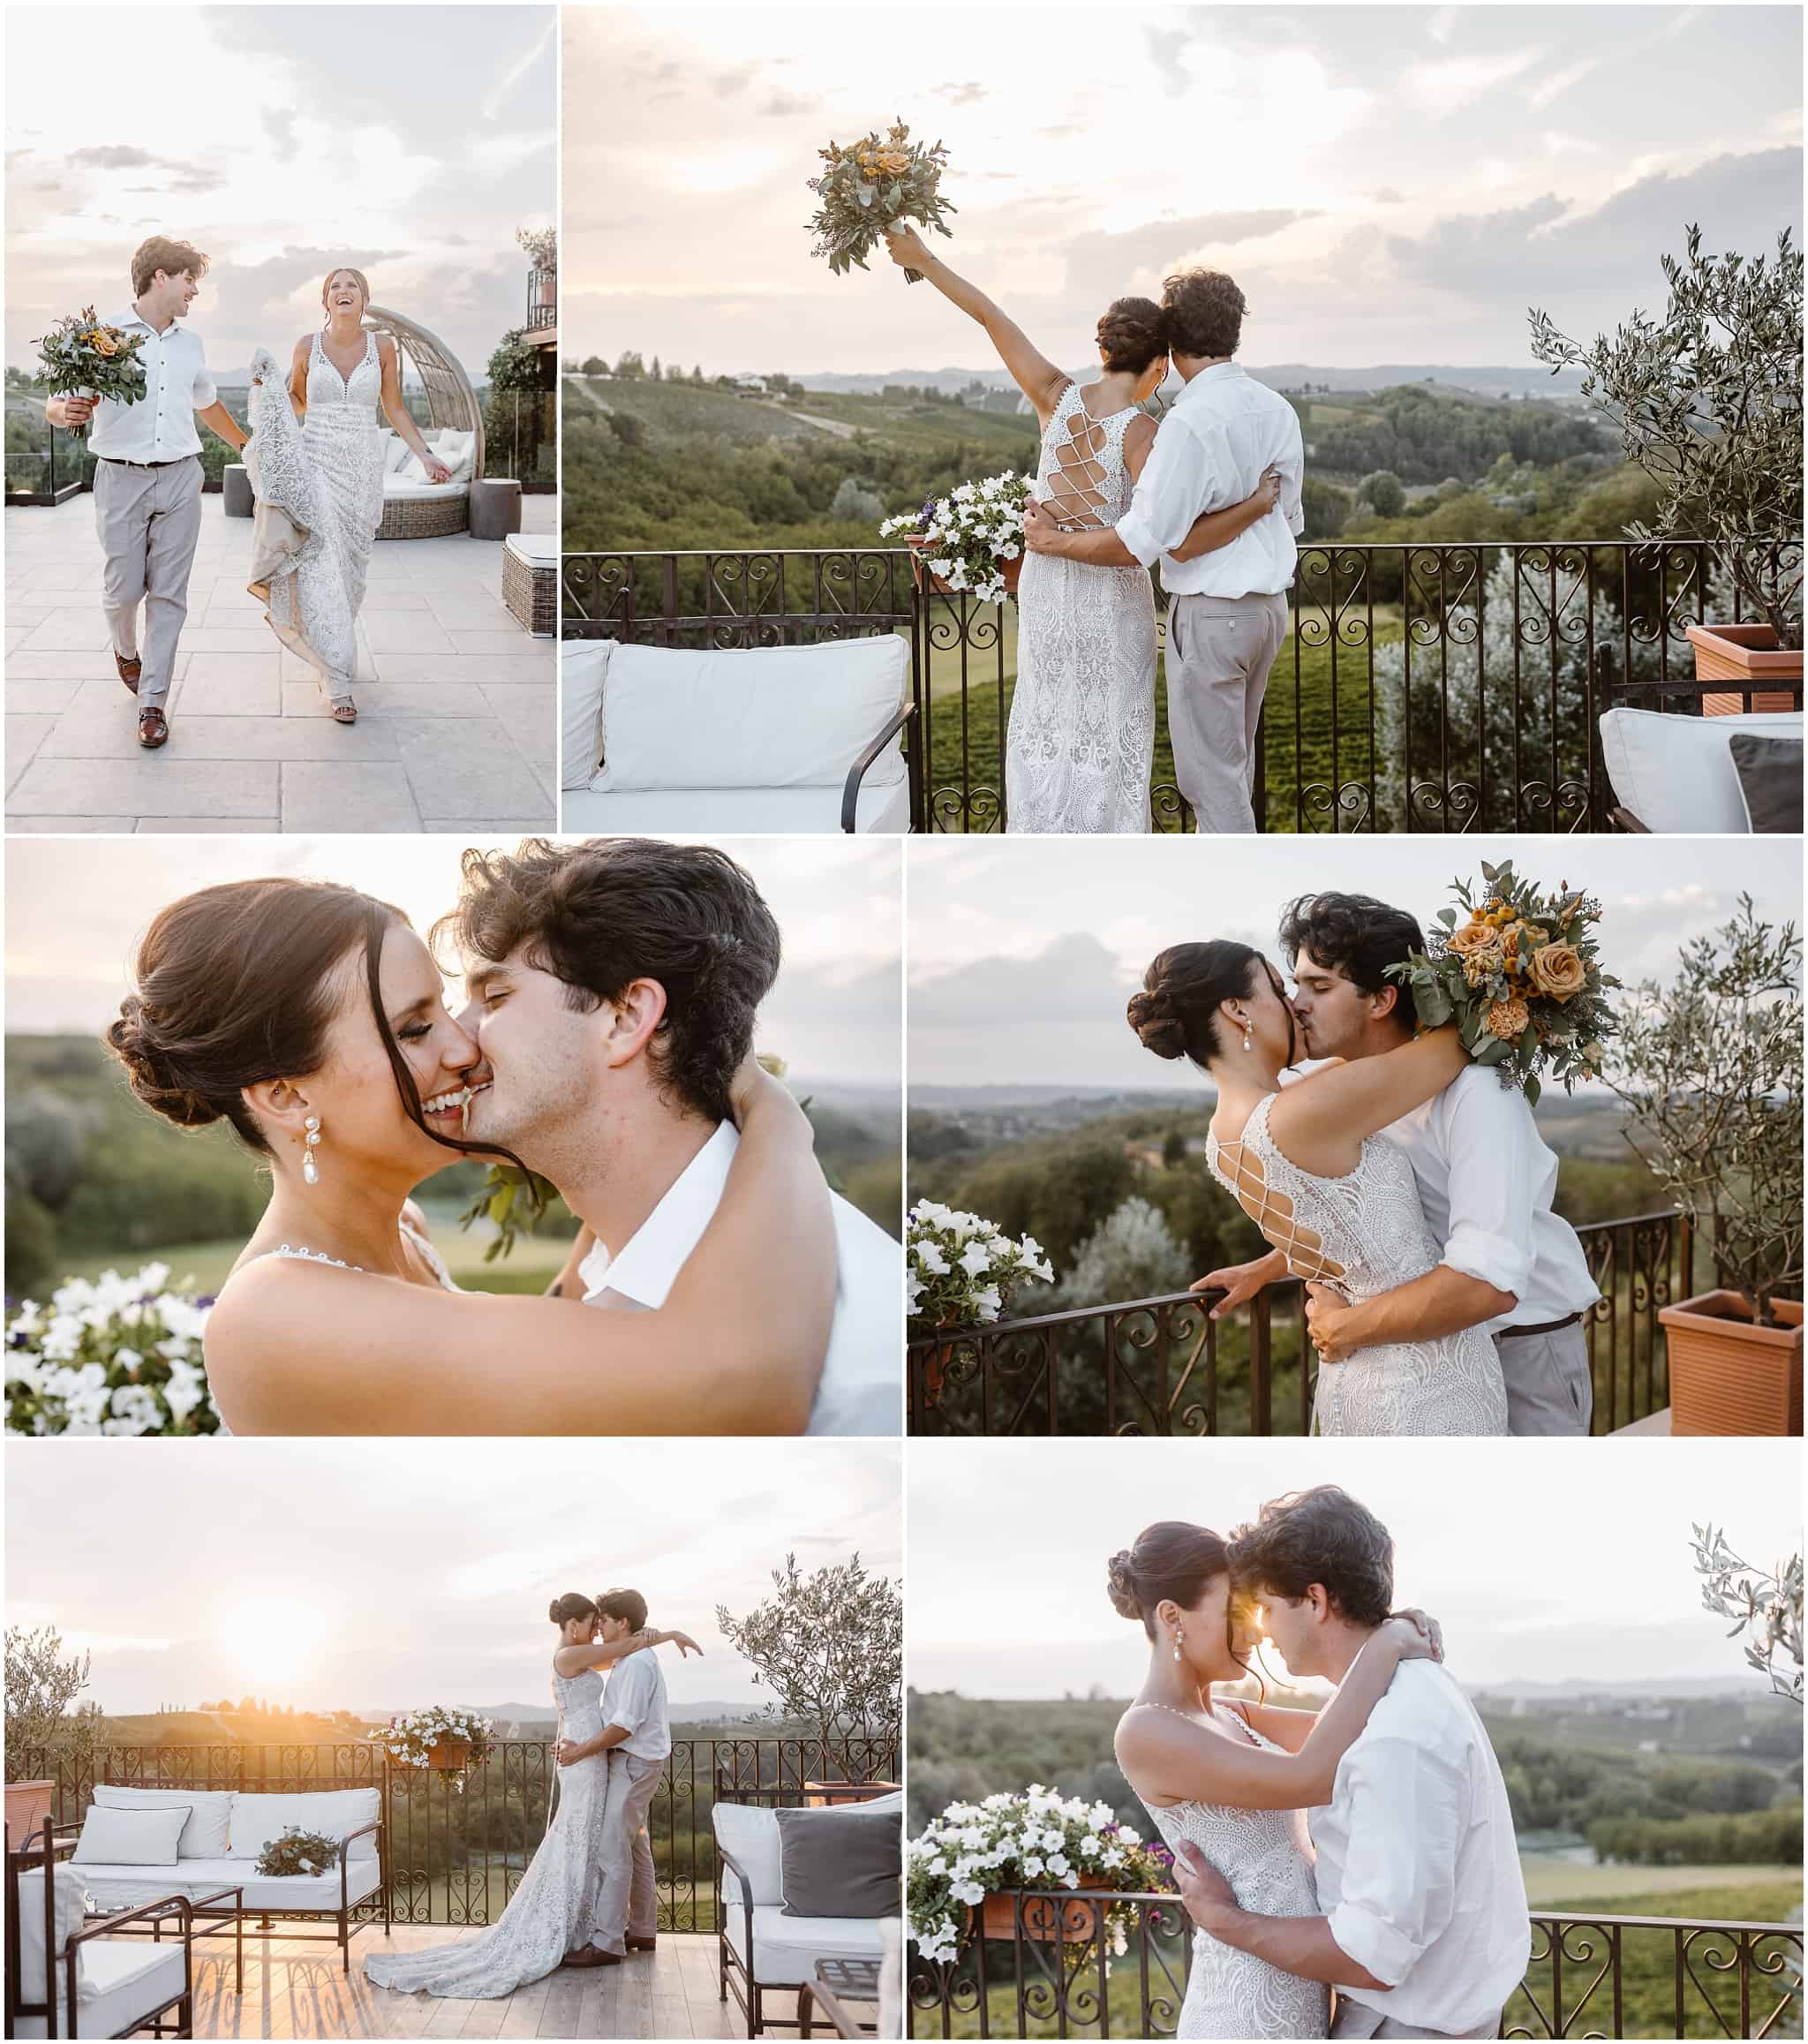 Romantic wedding photos during sunset of bride and groom in Italy.